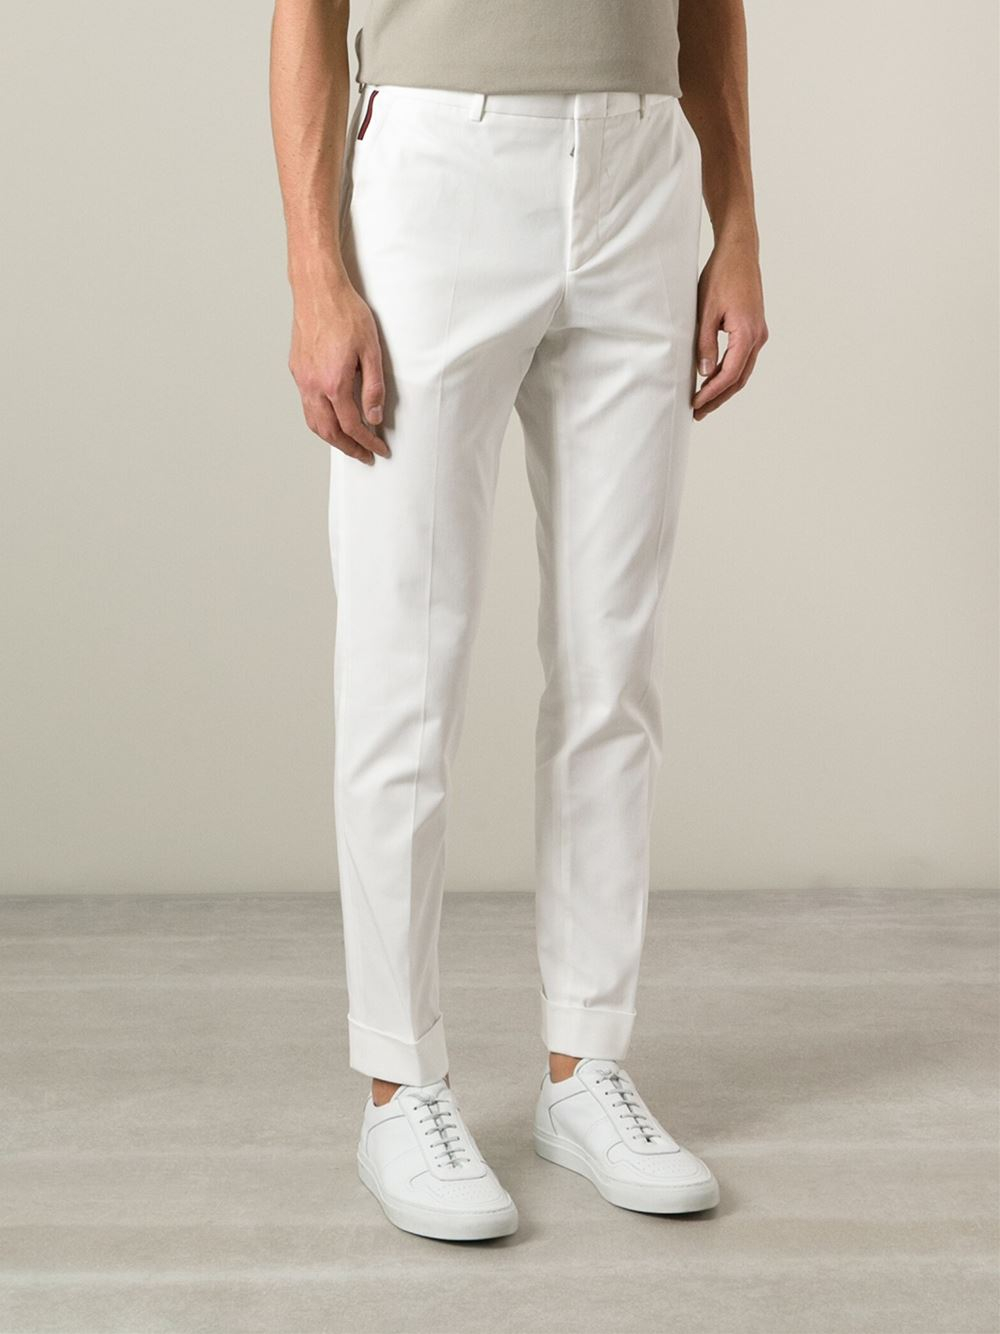 Gucci Chino Trousers in White for Men - Lyst